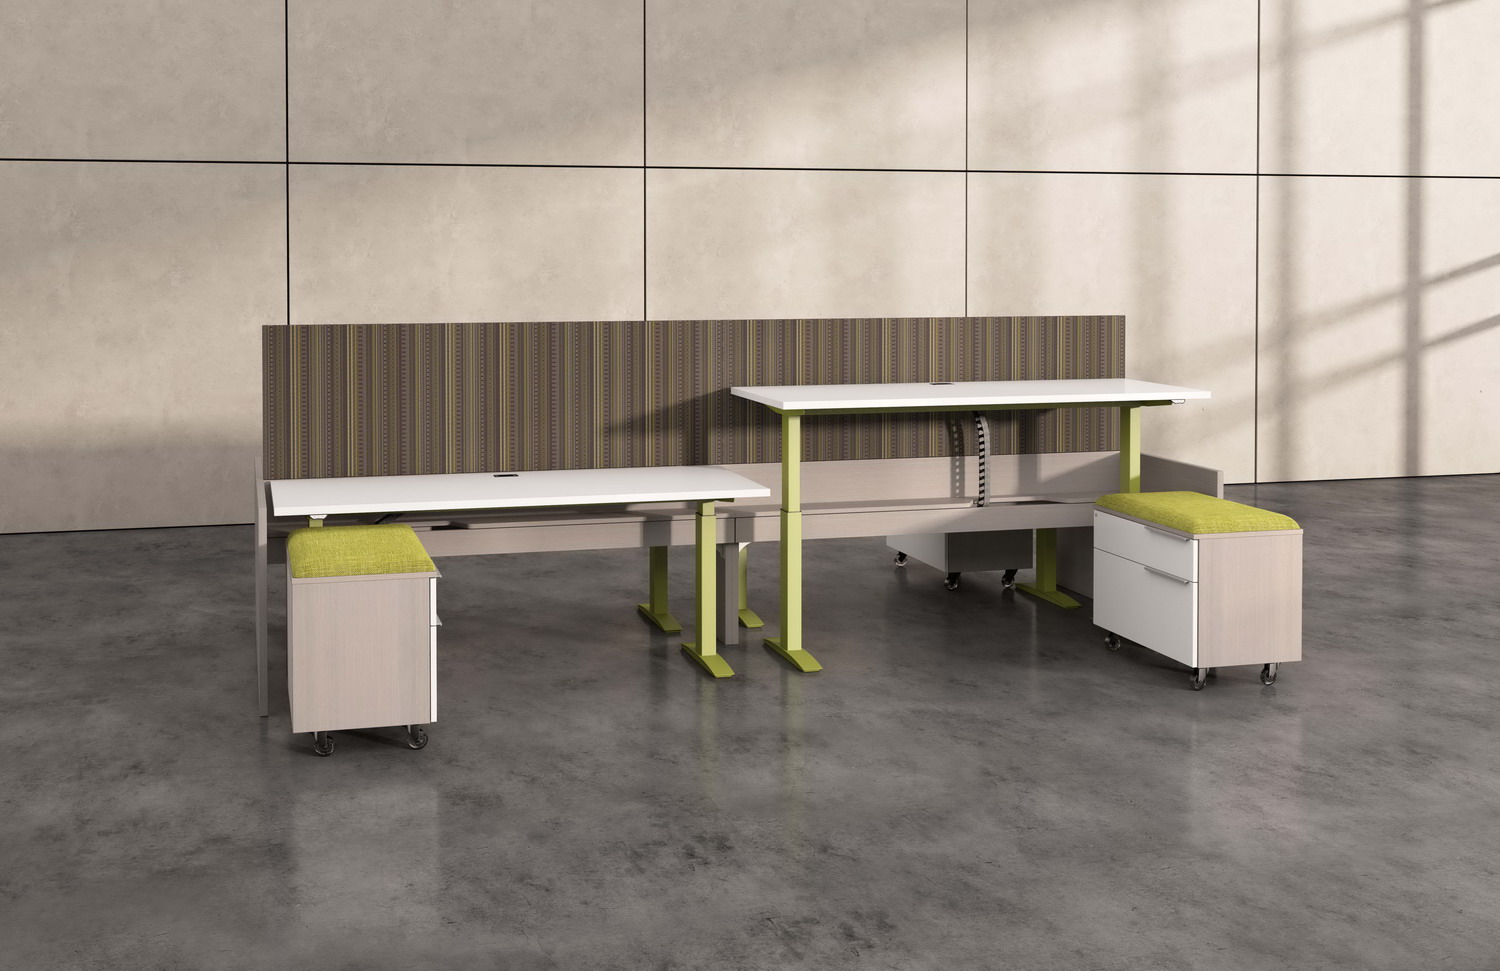 Contract Furniture Rendering of a pair of height adjustable desks side by side.